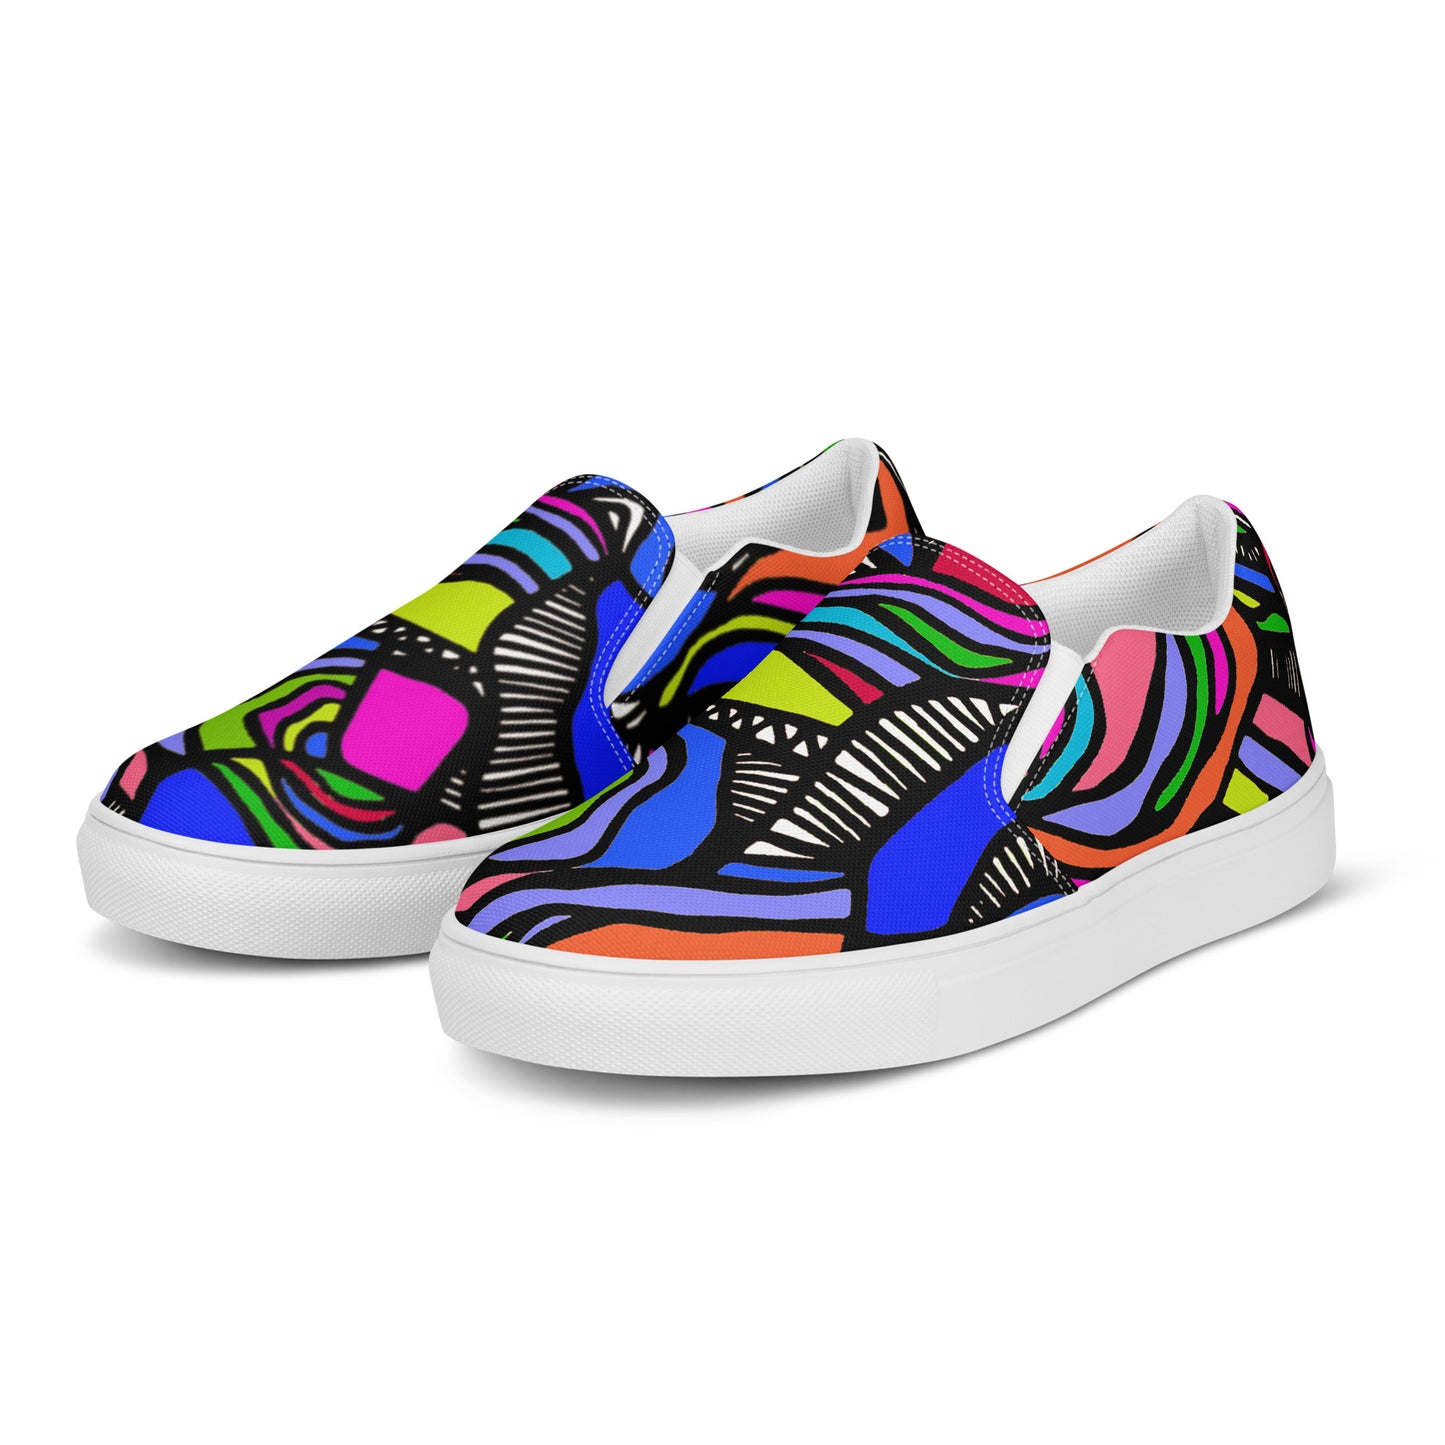 It's a Colorful Whirled Women’s Slip-On Canvas Sneakers